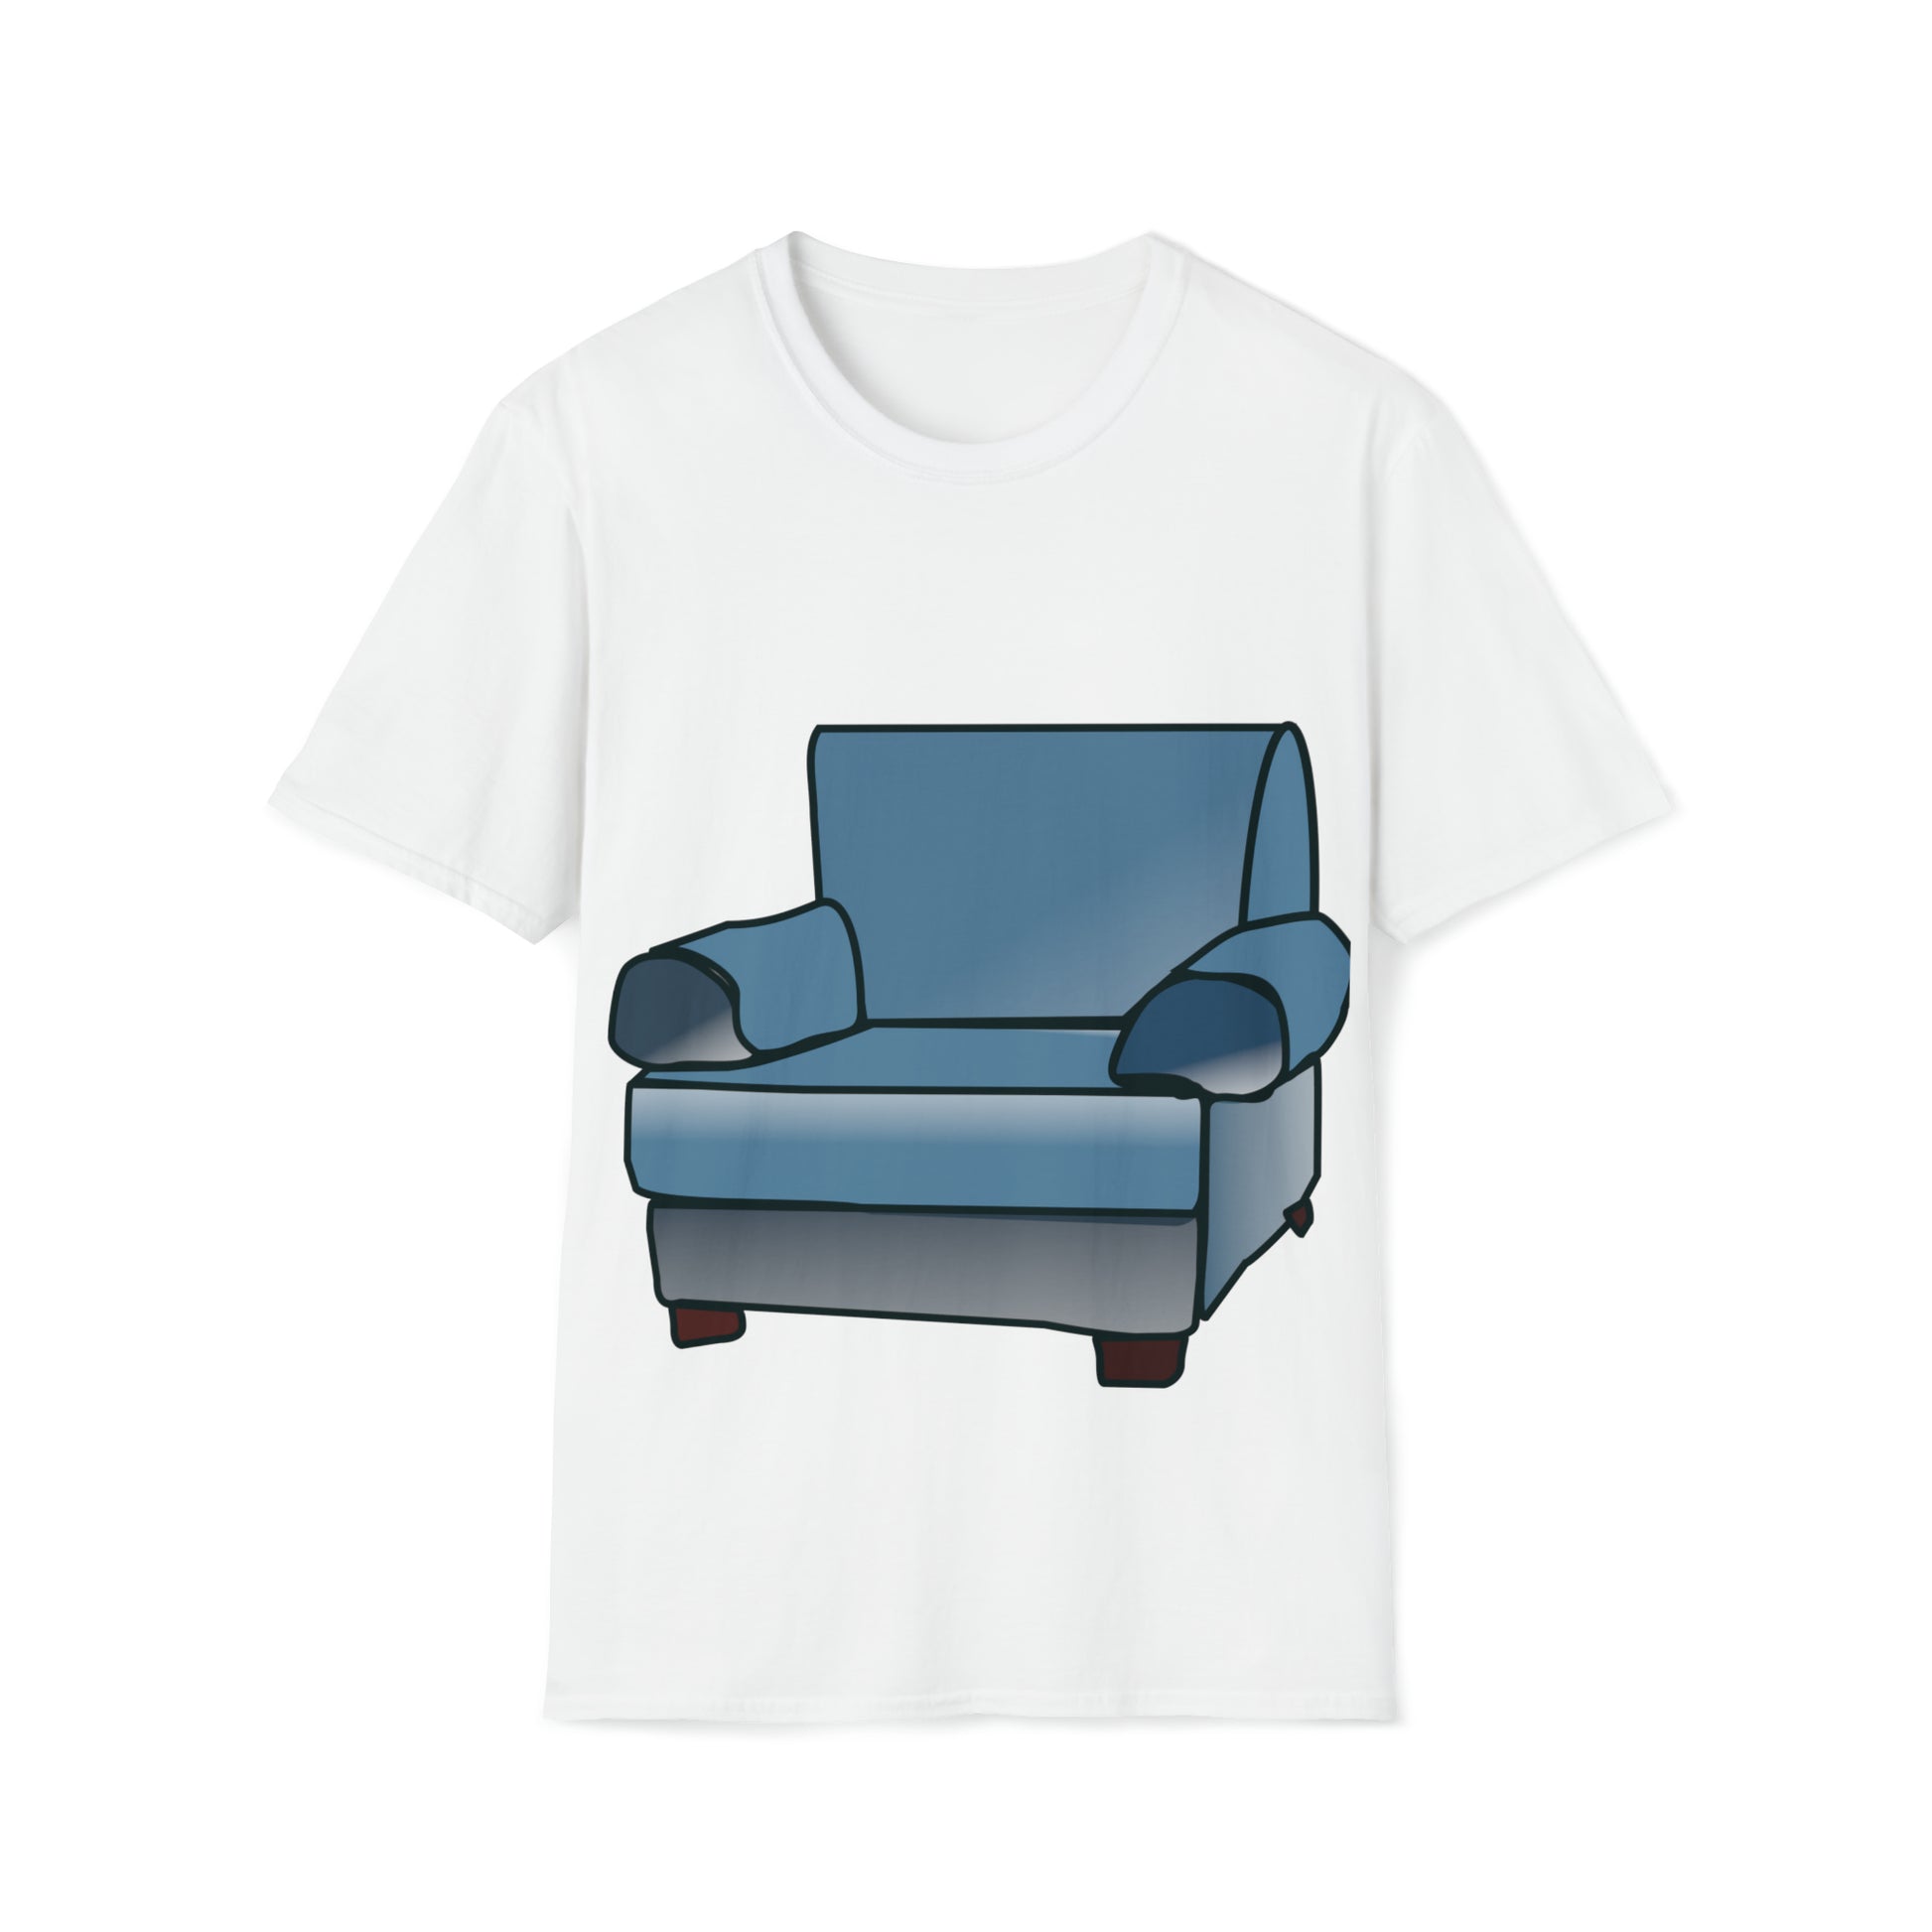 Sit Back and Relax on the Couch T-Shirt